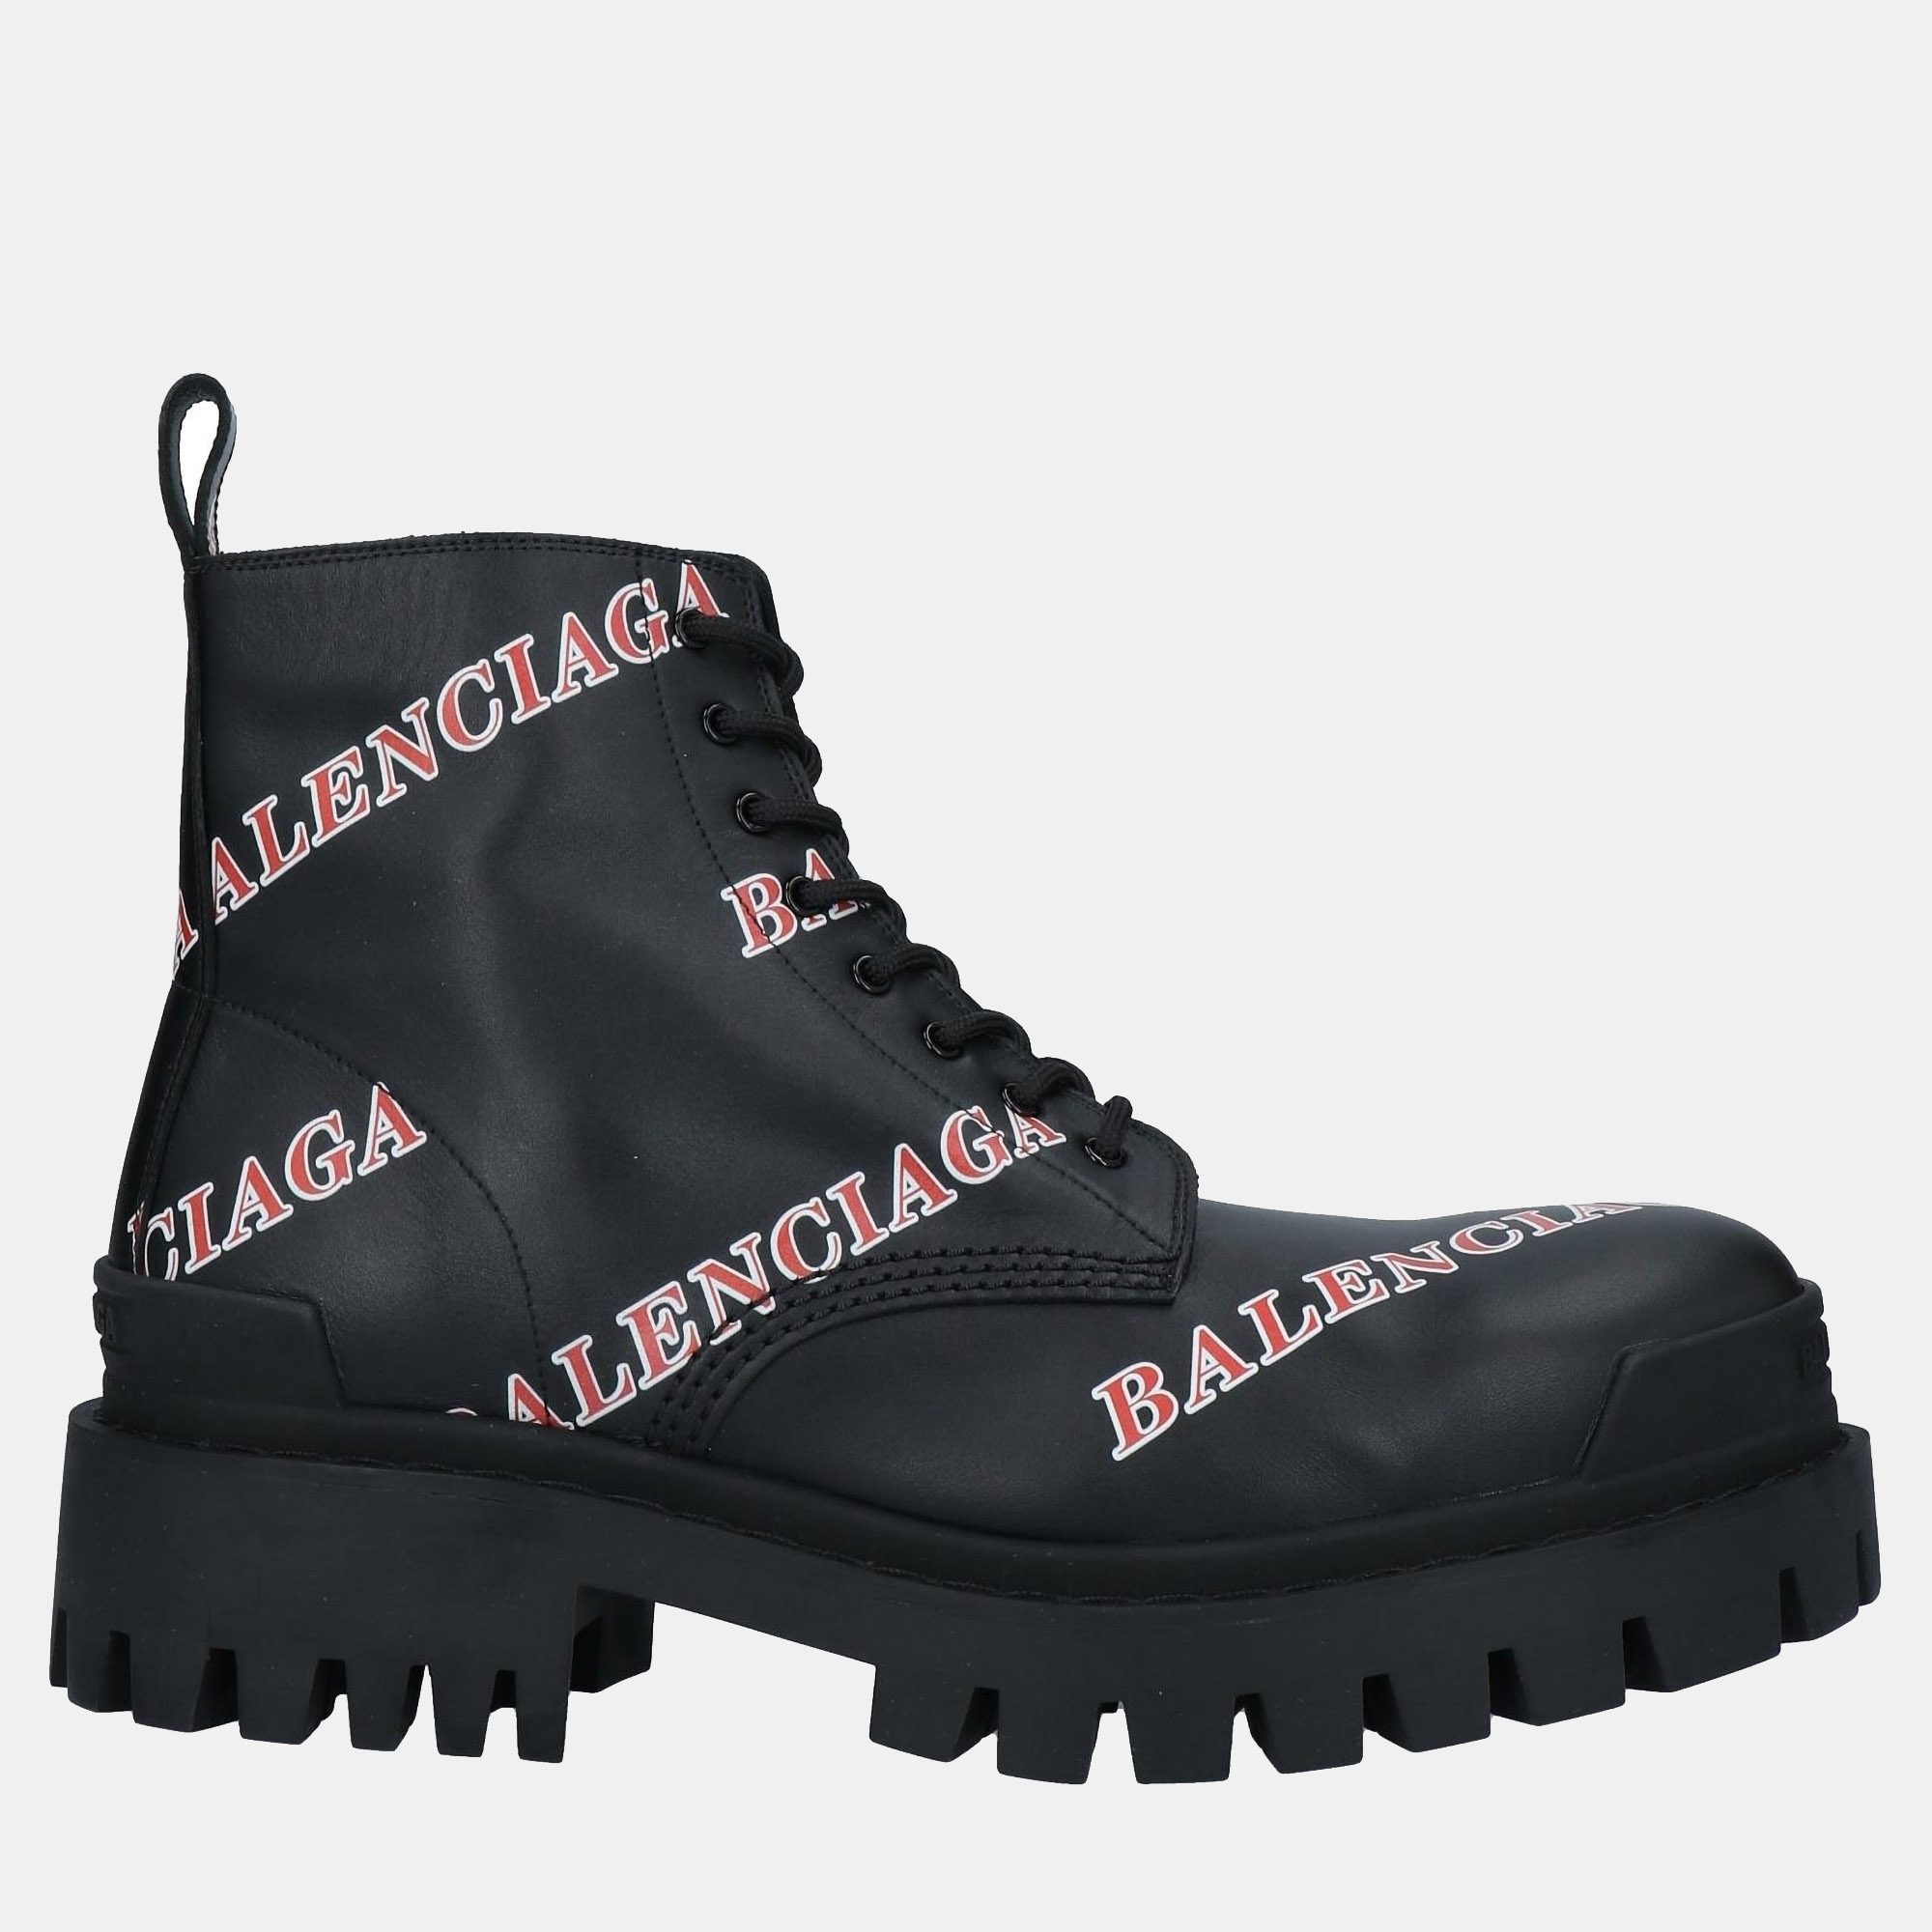 Balenciaga leather ankle combat boots size 42